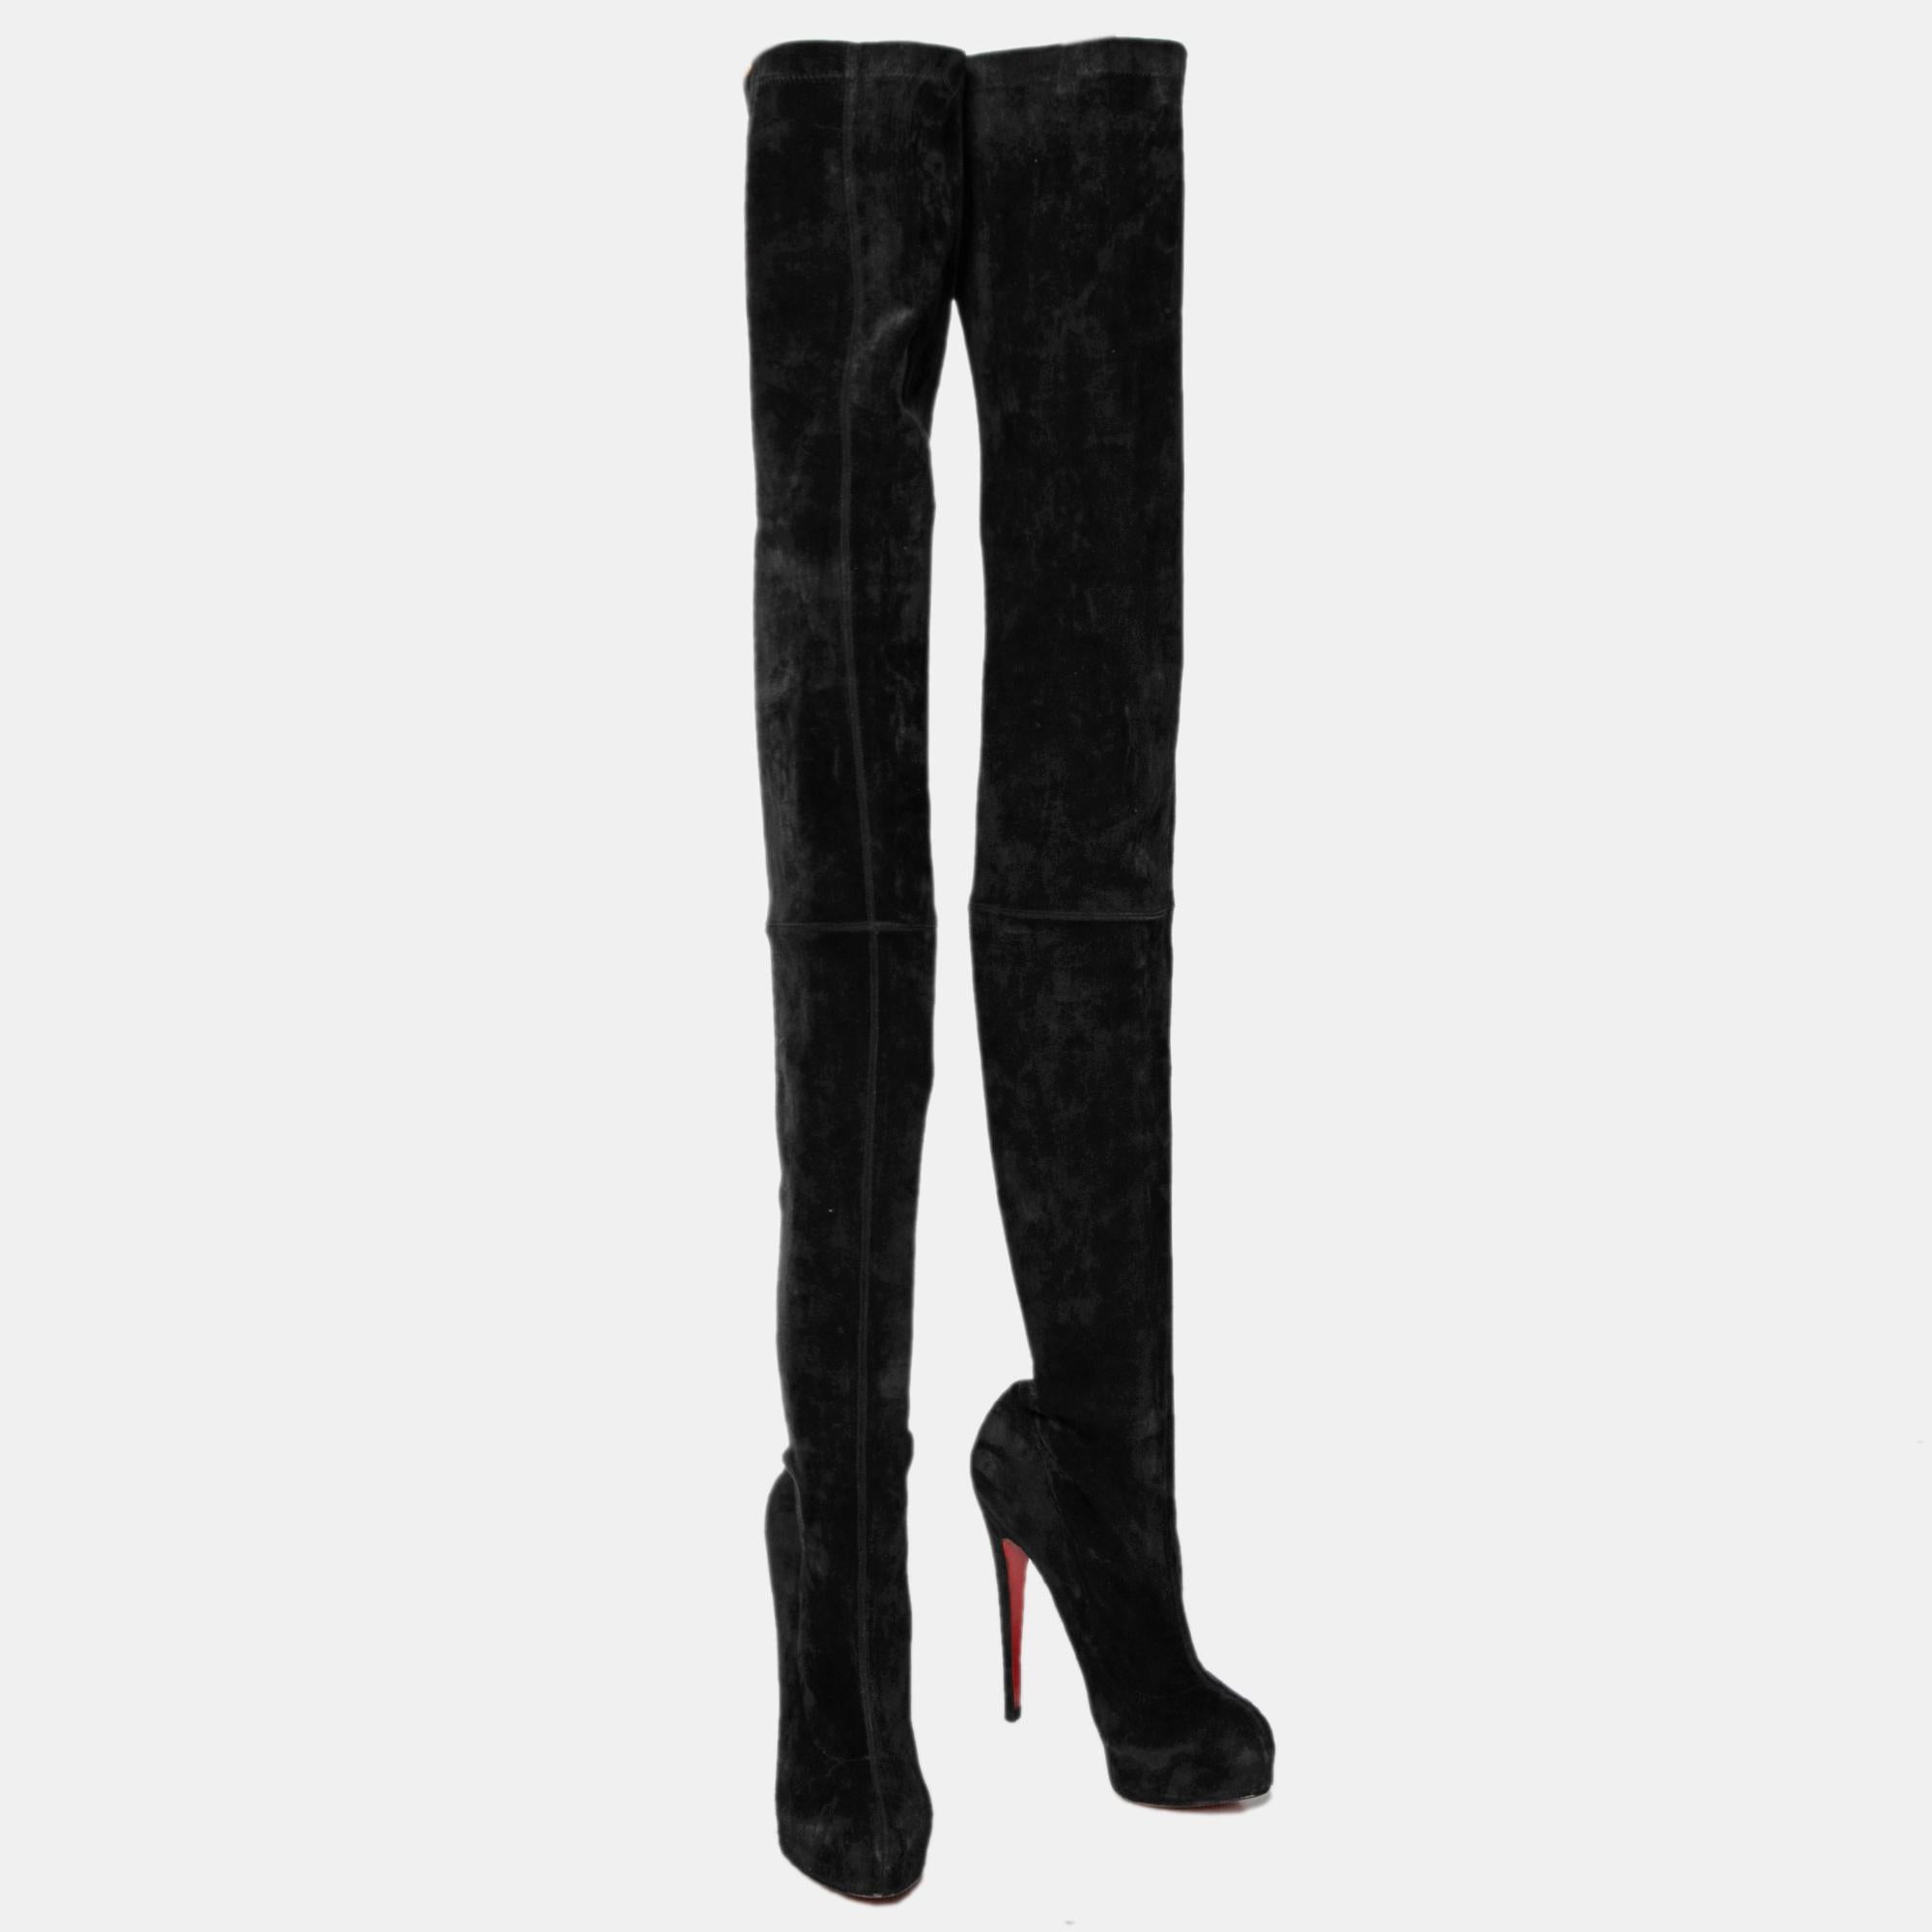 Christian Louboutin Black Suede Monica Over the Knee Boots Size 41.5 1